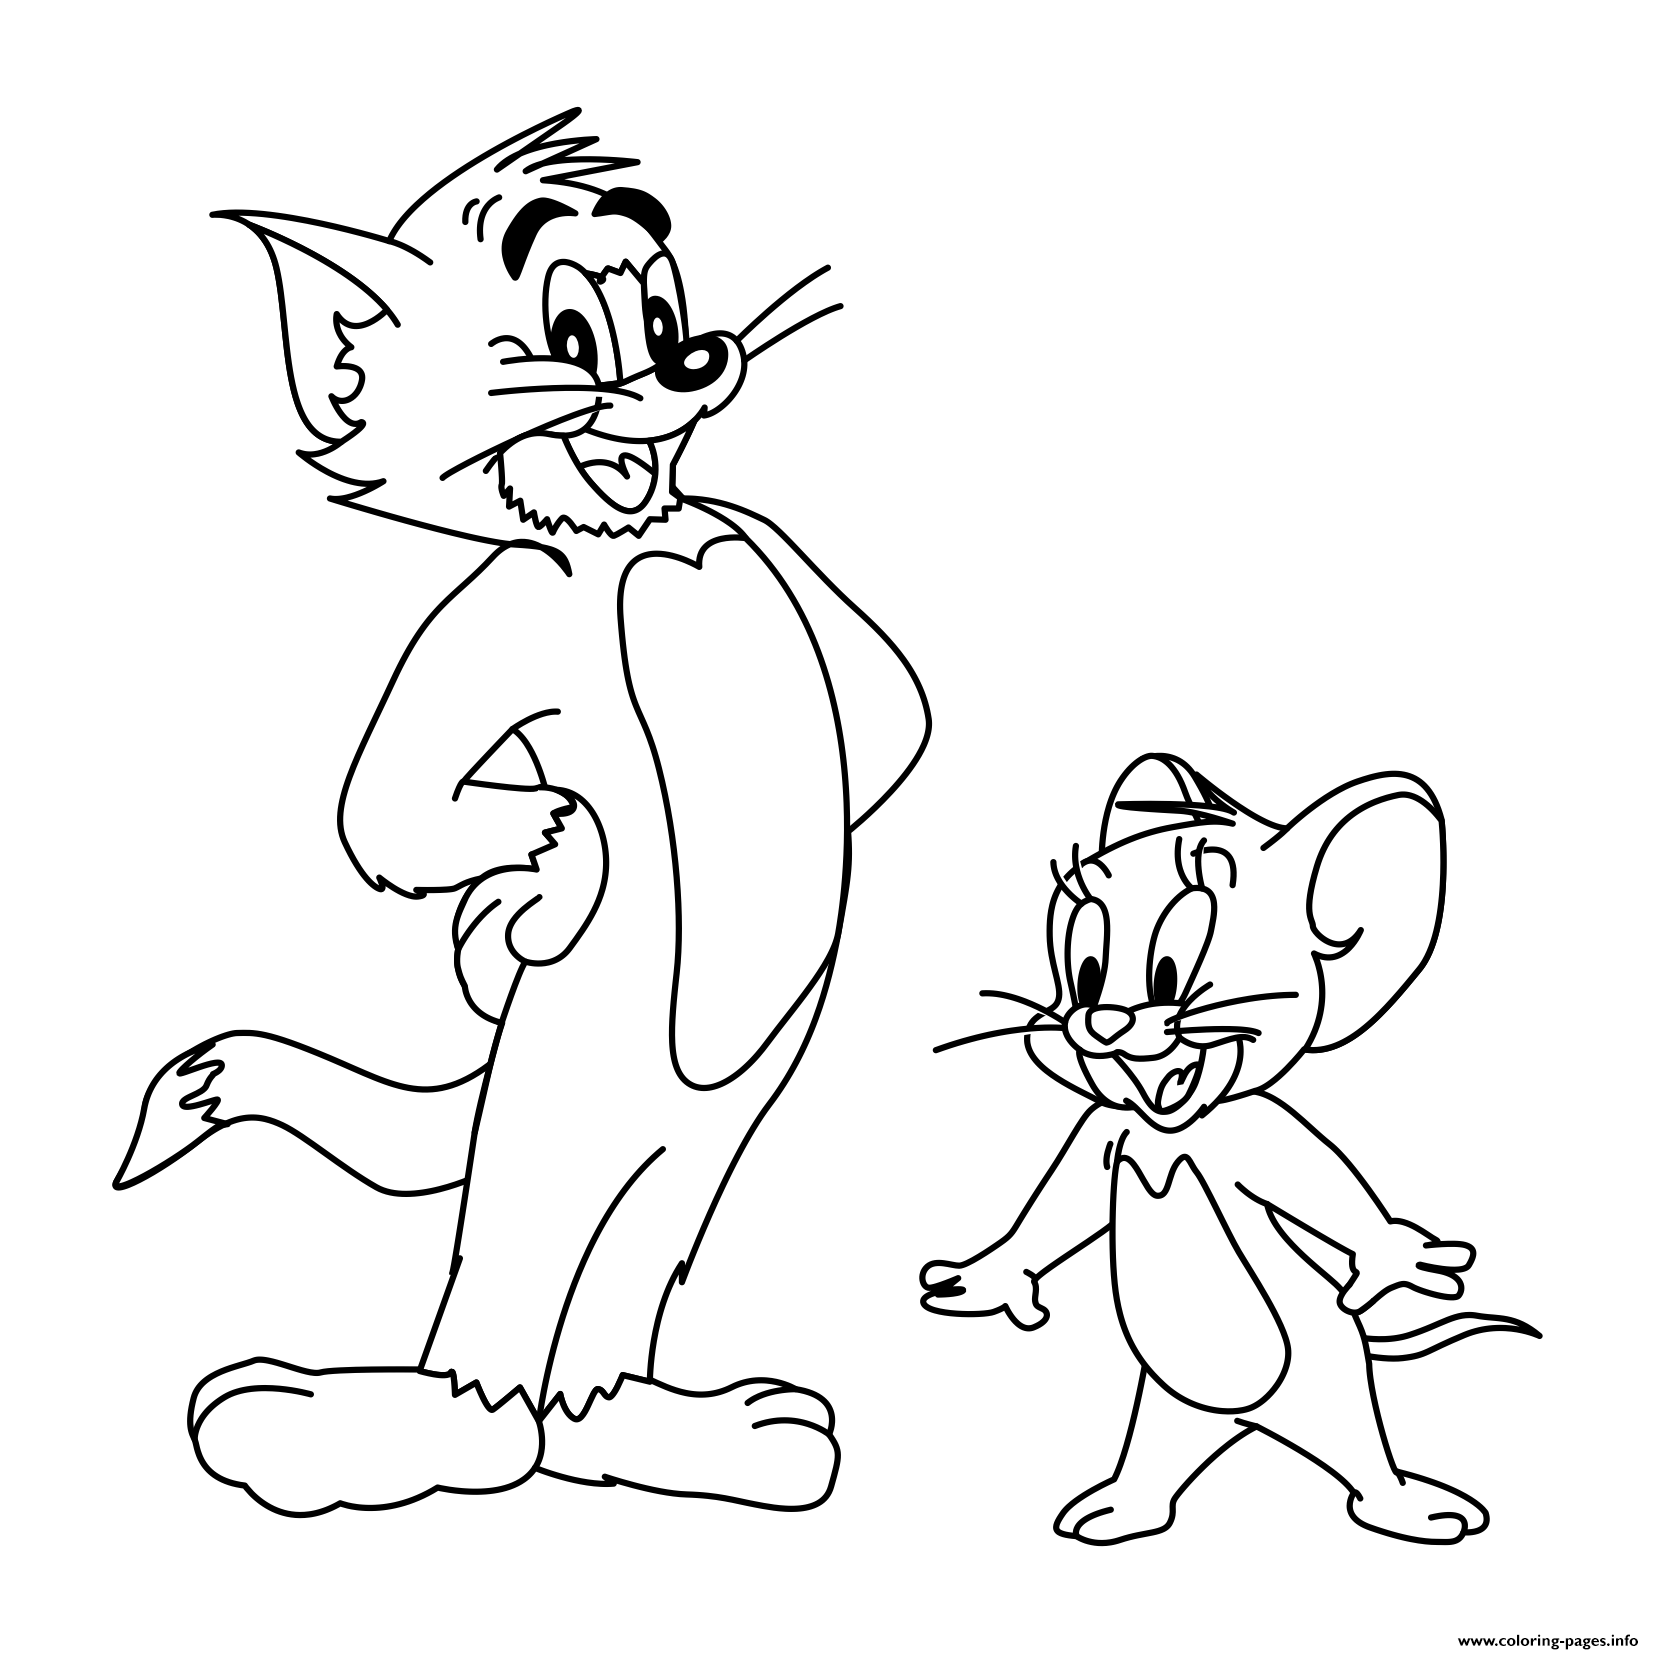 Free Tom And Jerry  For Kidsbc7e coloring